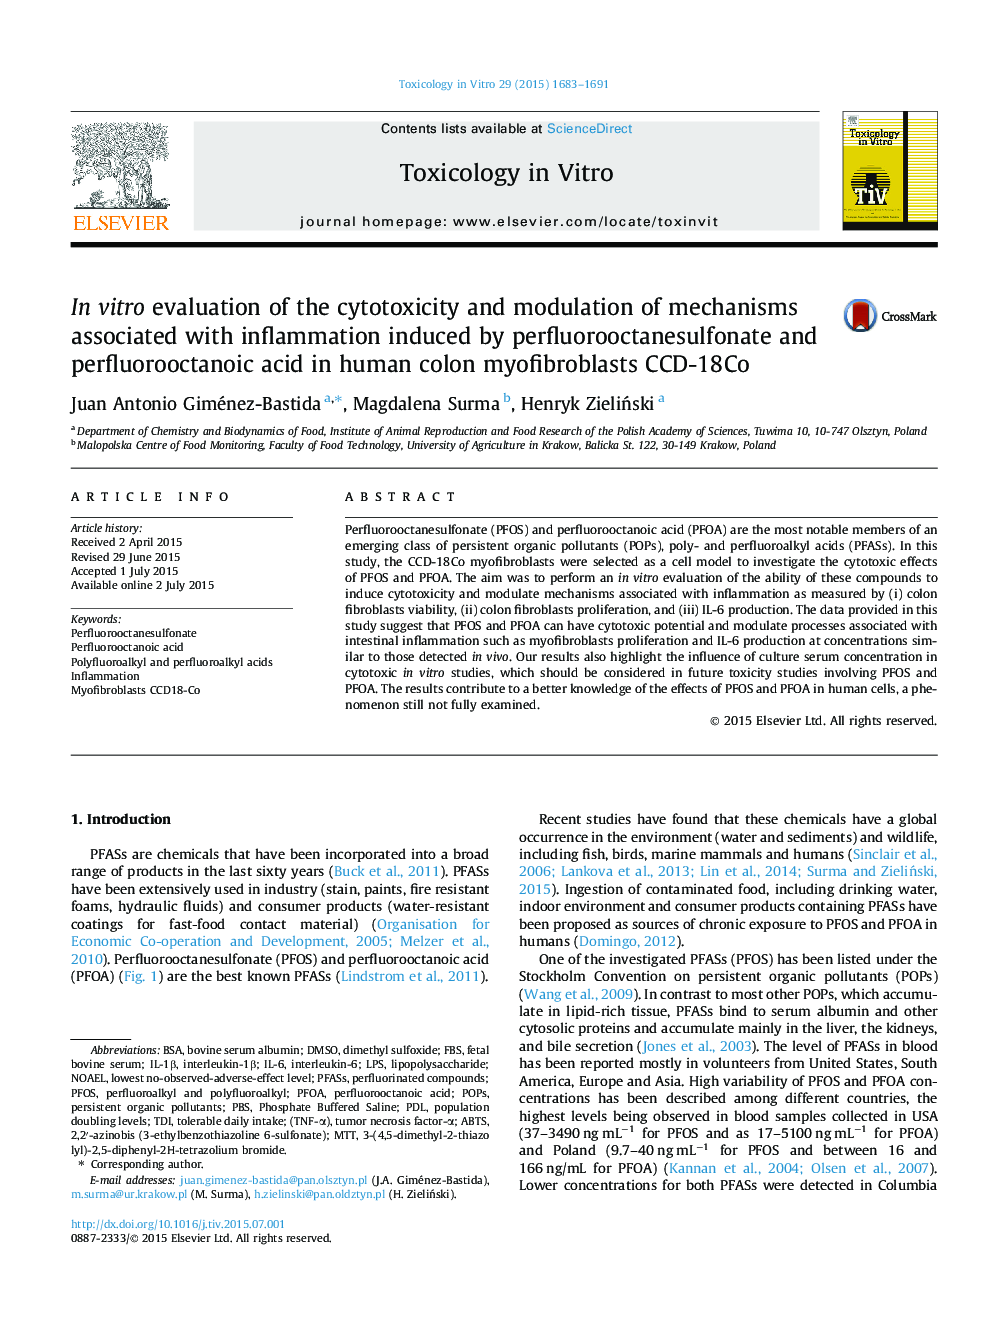 In vitro evaluation of the cytotoxicity and modulation of mechanisms associated with inflammation induced by perfluorooctanesulfonate and perfluorooctanoic acid in human colon myofibroblasts CCD-18Co